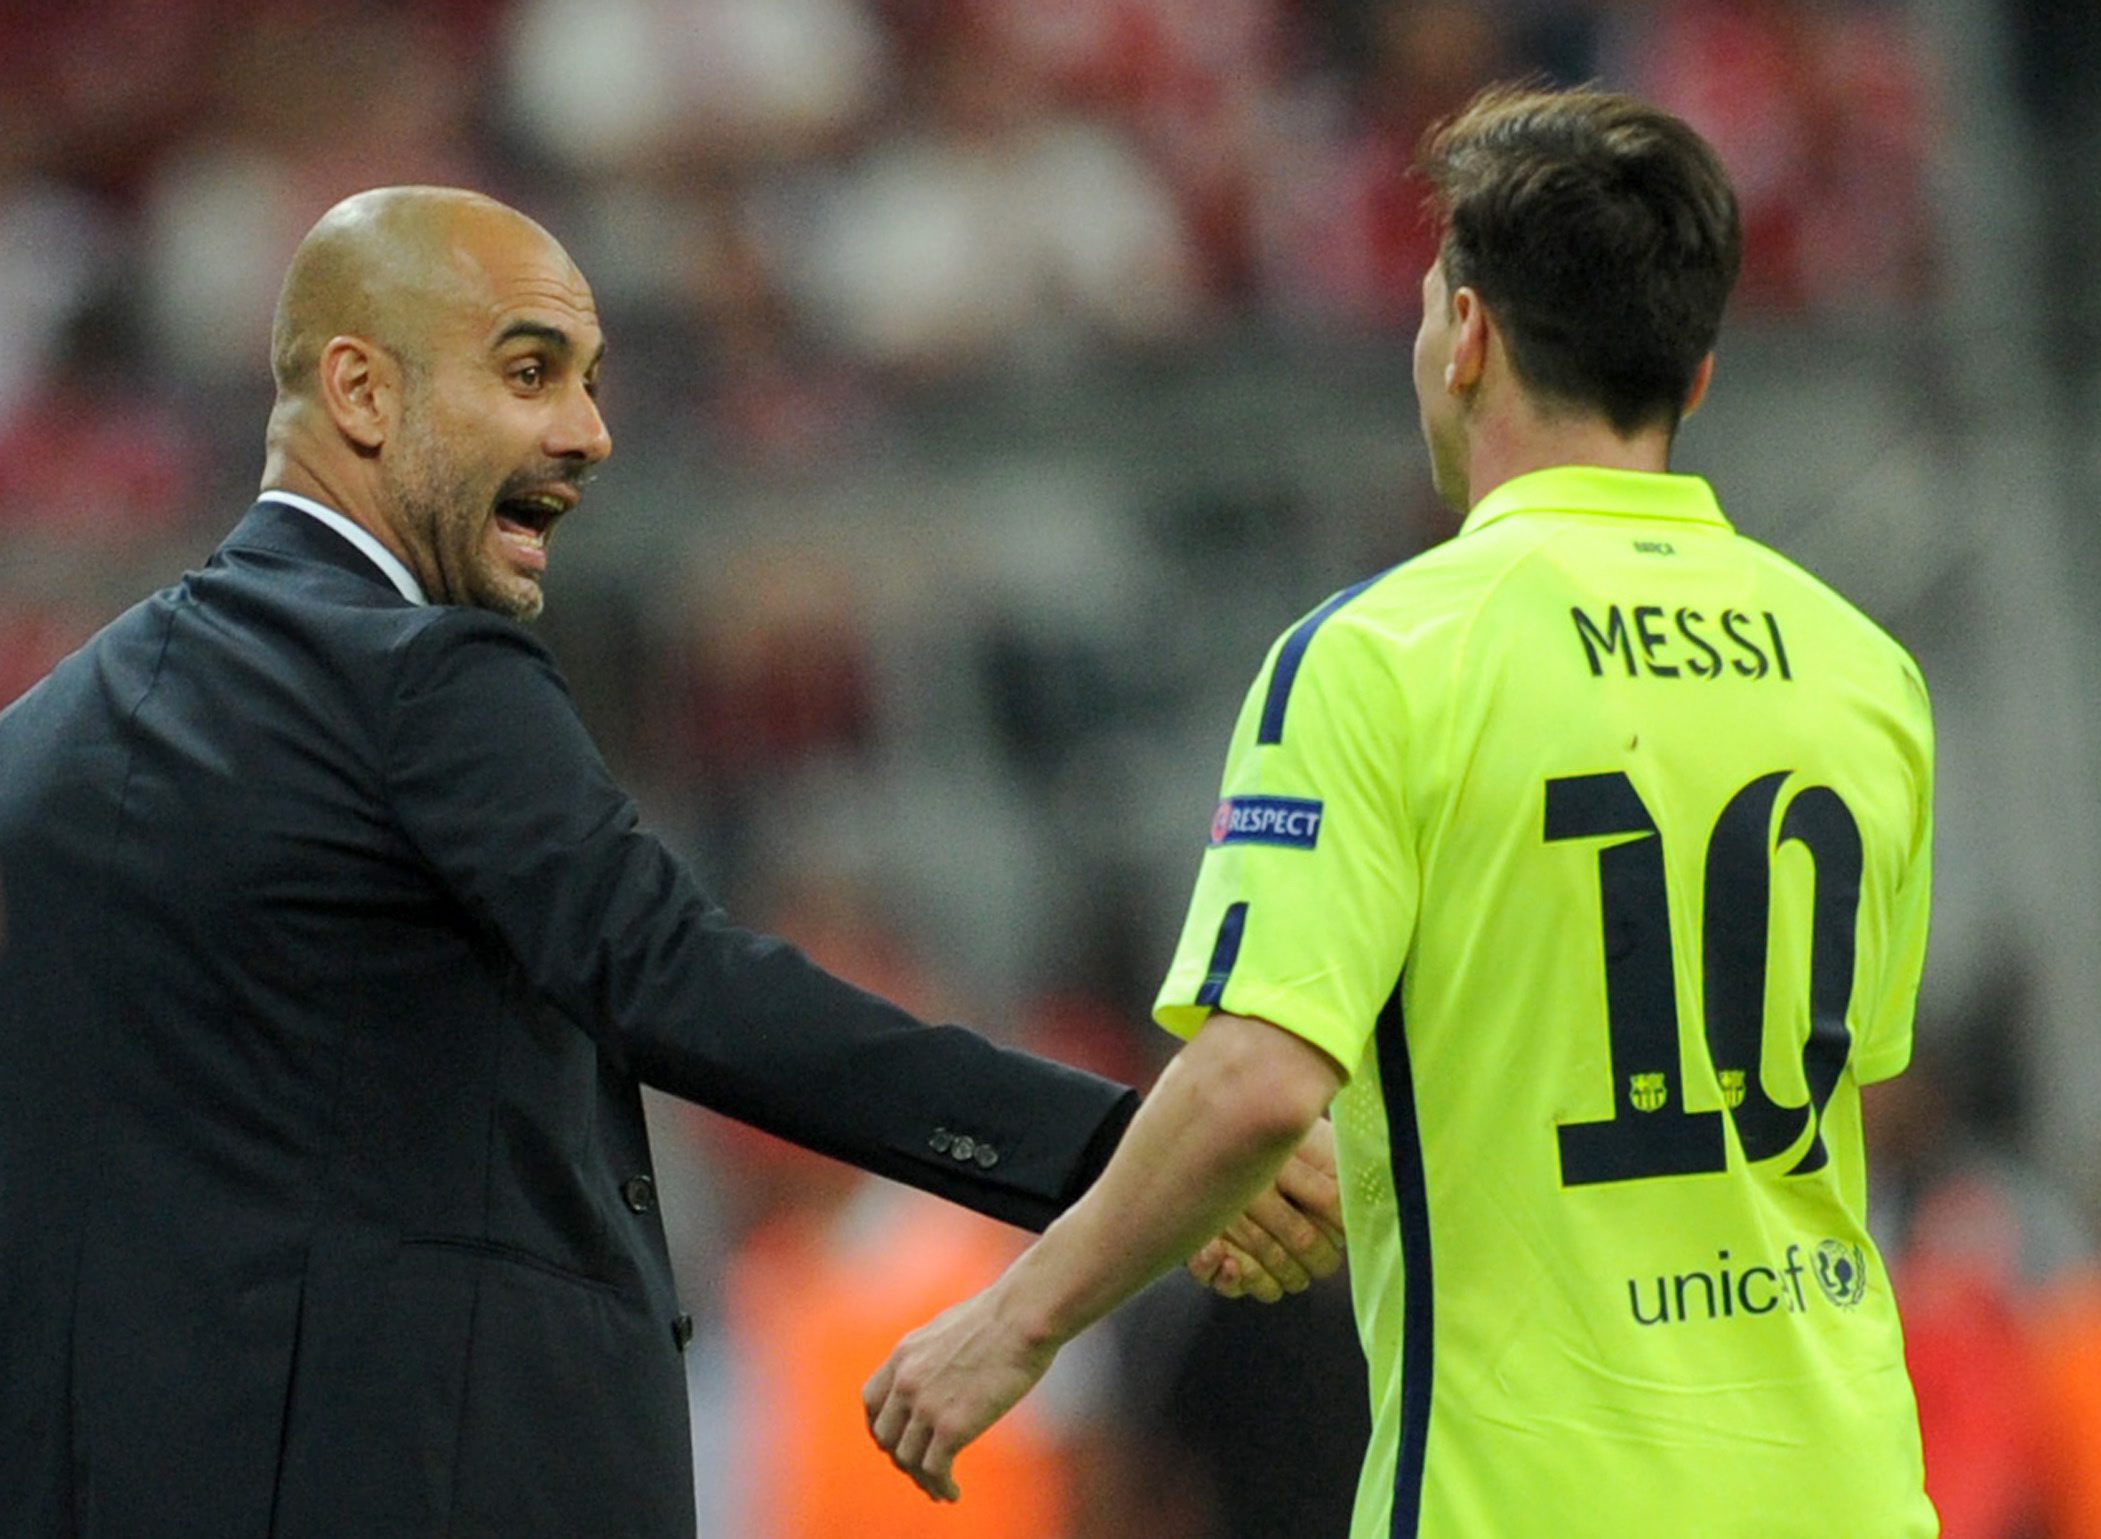 Guardiola and Messi to reunite in England?